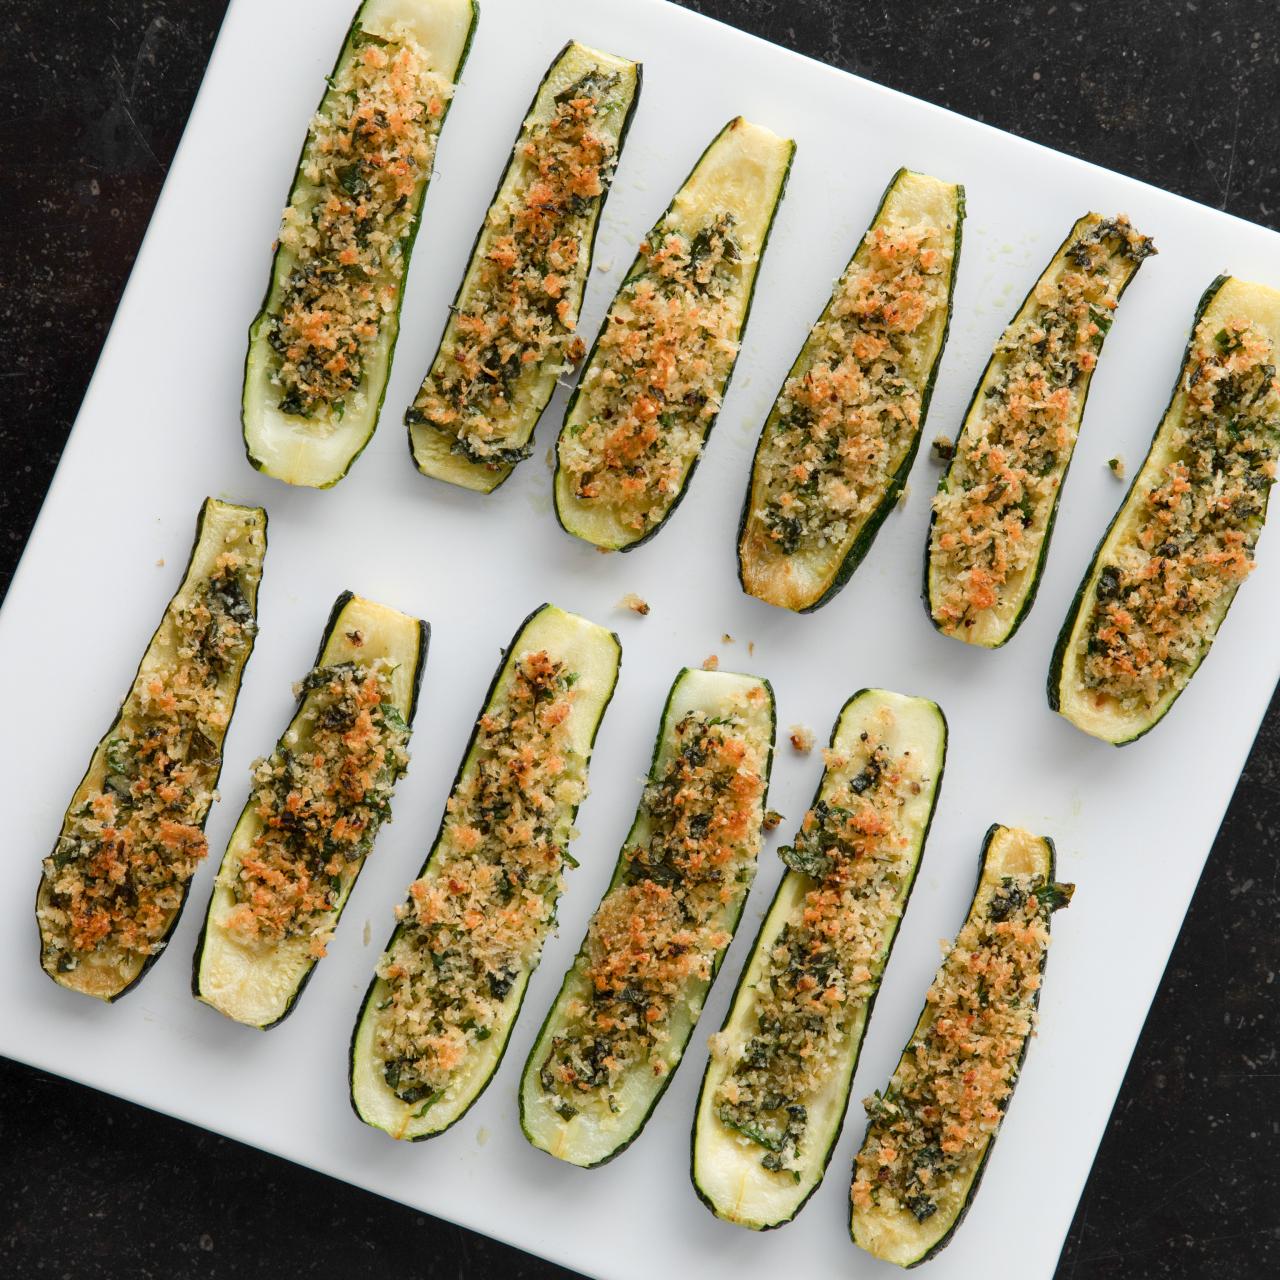 15 best ever courgette recipes - delicious. magazine